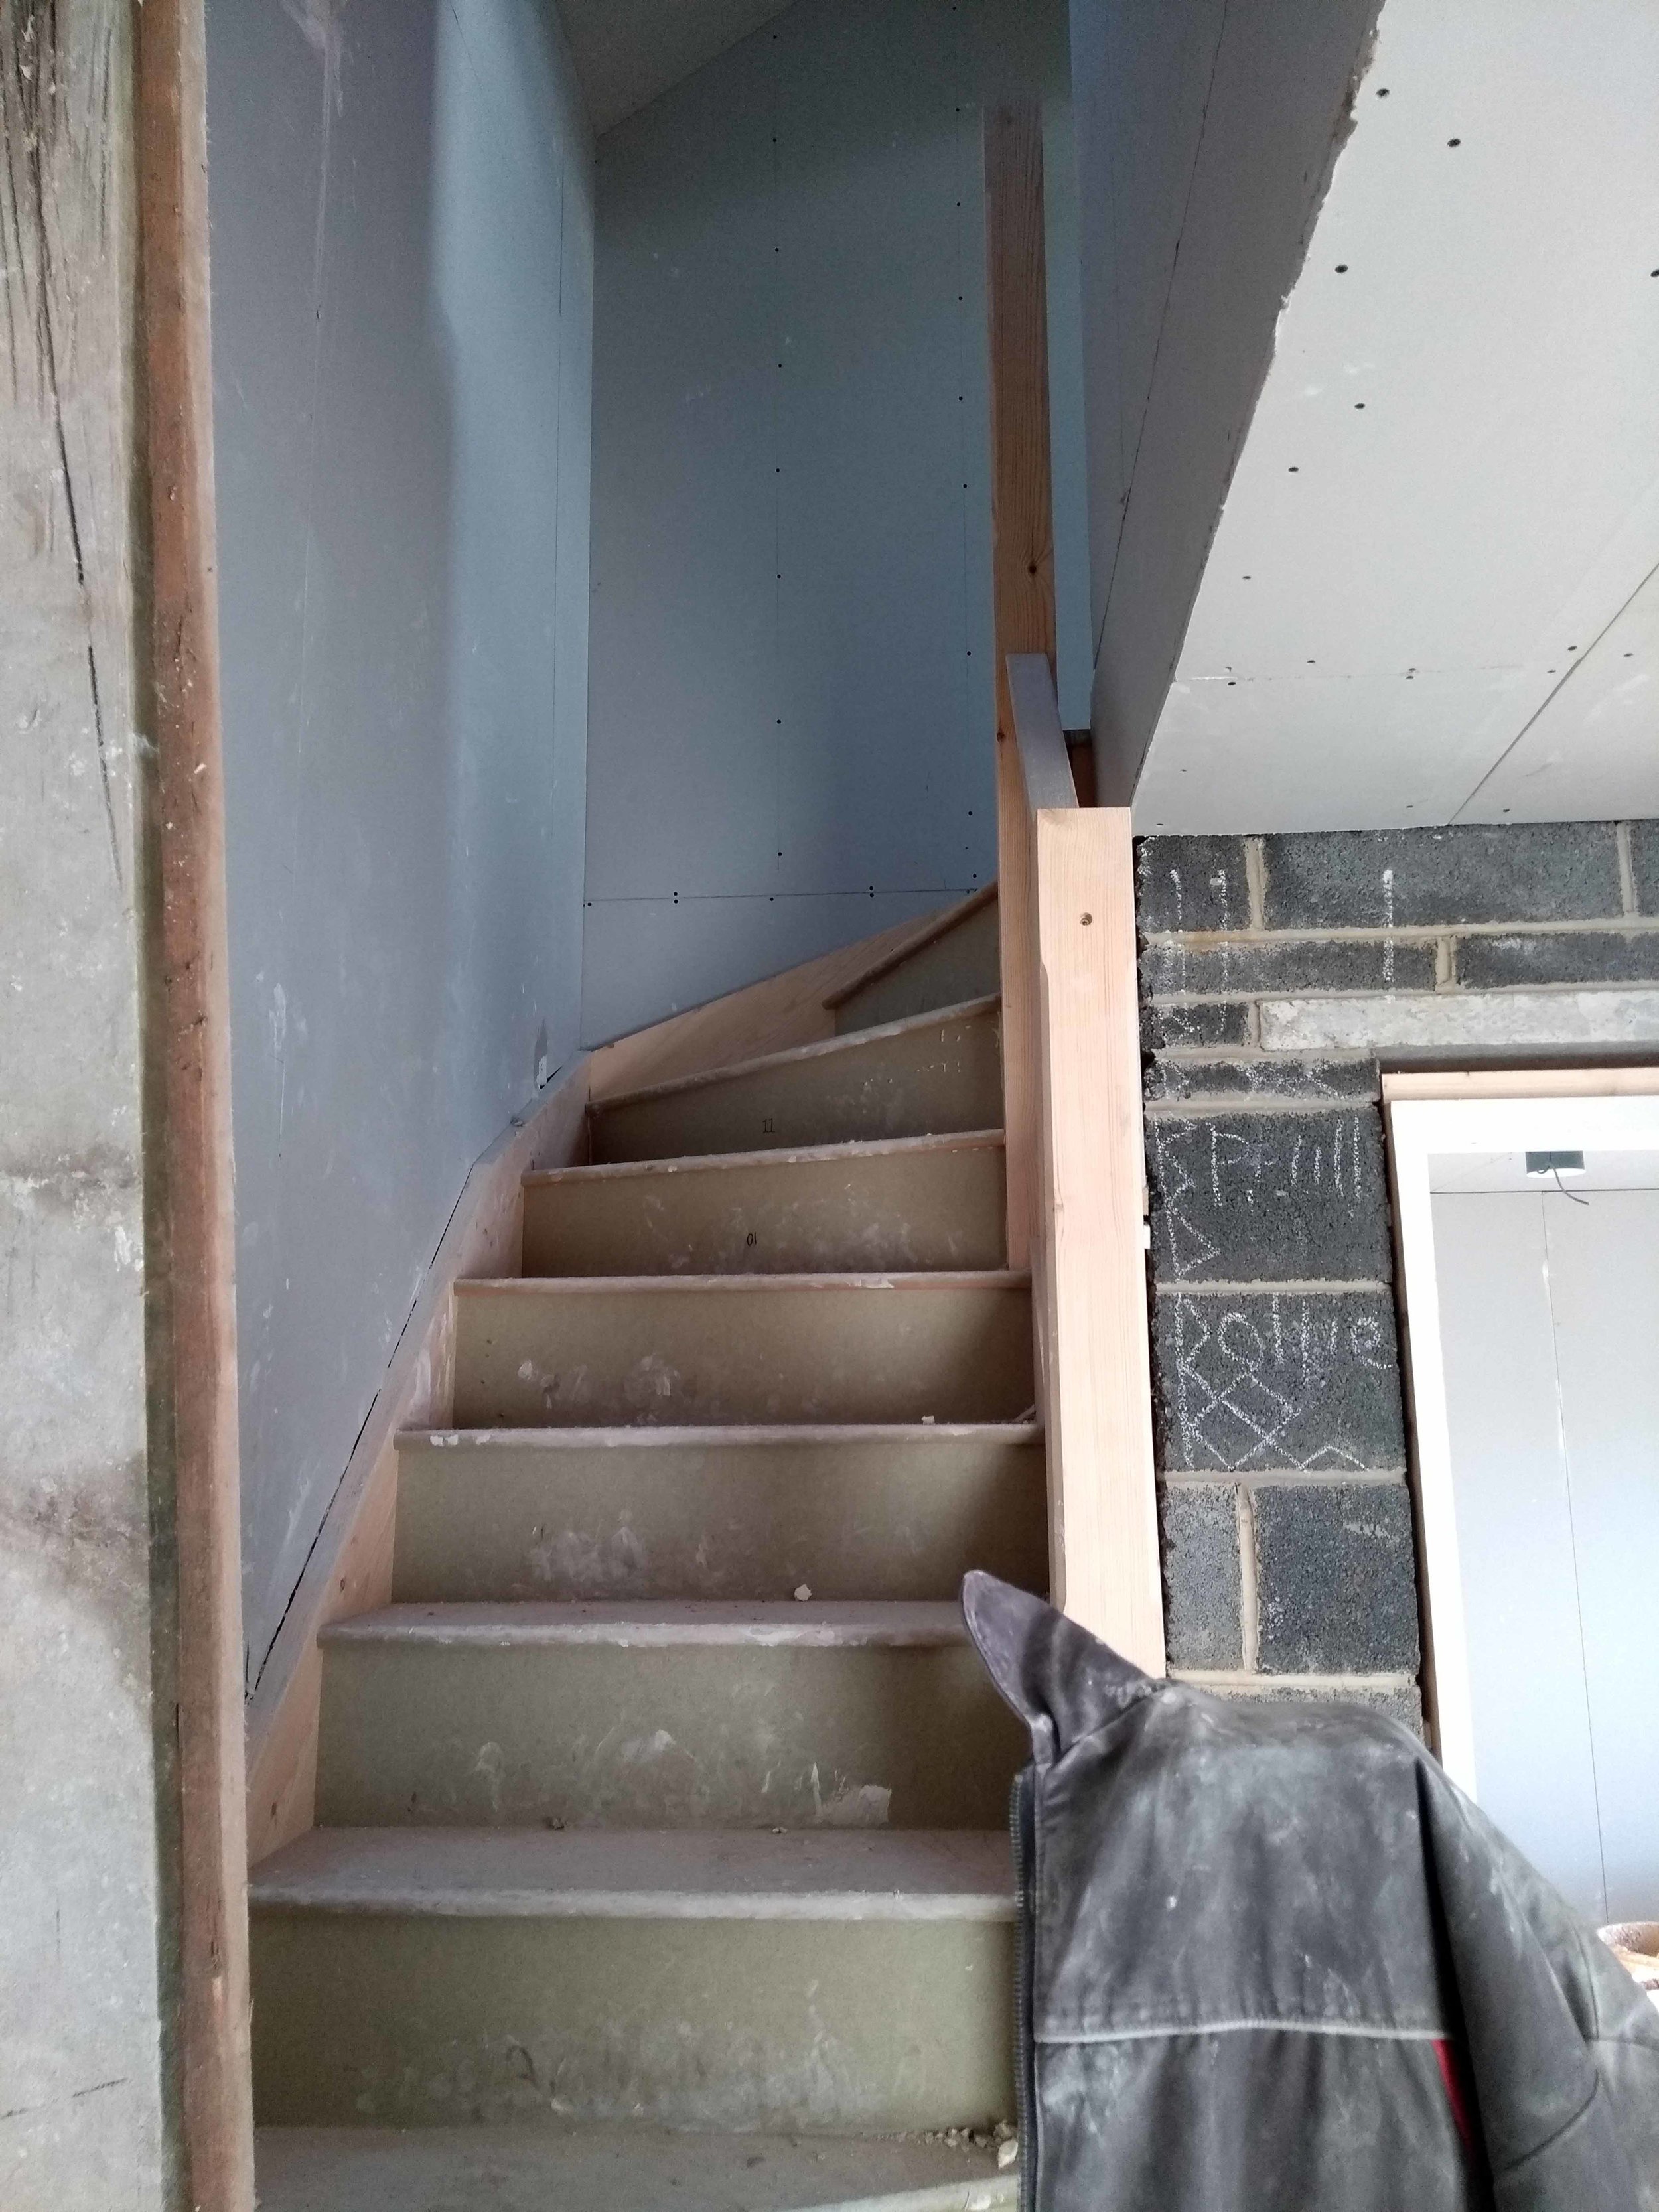 Stairs after